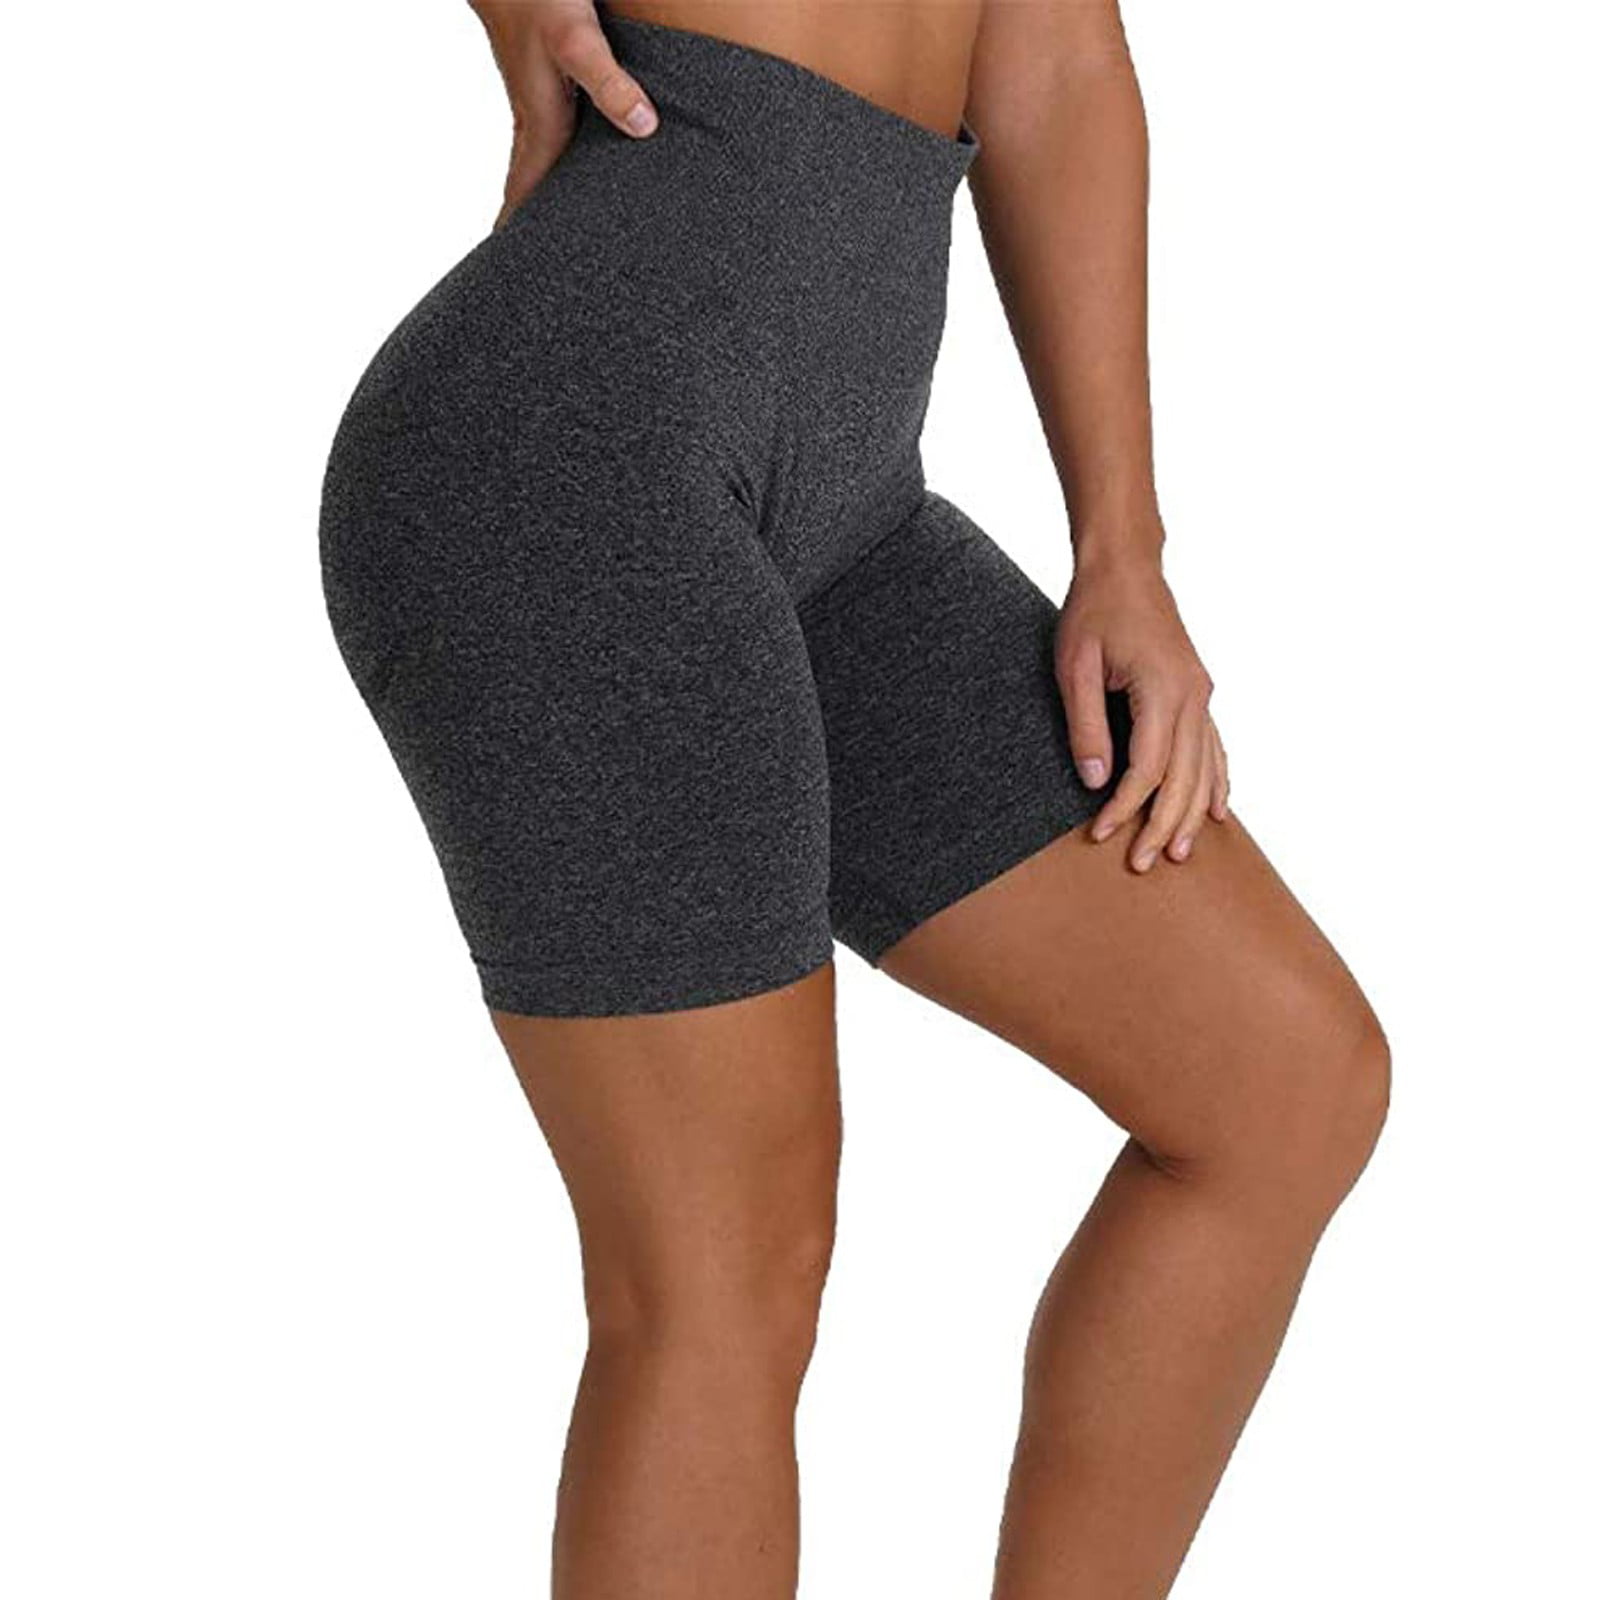 kpoplk Yoga Pants With Pockets For Women,Women's Yoga Short Tummy Control  Workout Running Athletic Non See-Through Yoga Shorts with Hidden Pocket(Black,M)  - Walmart.com